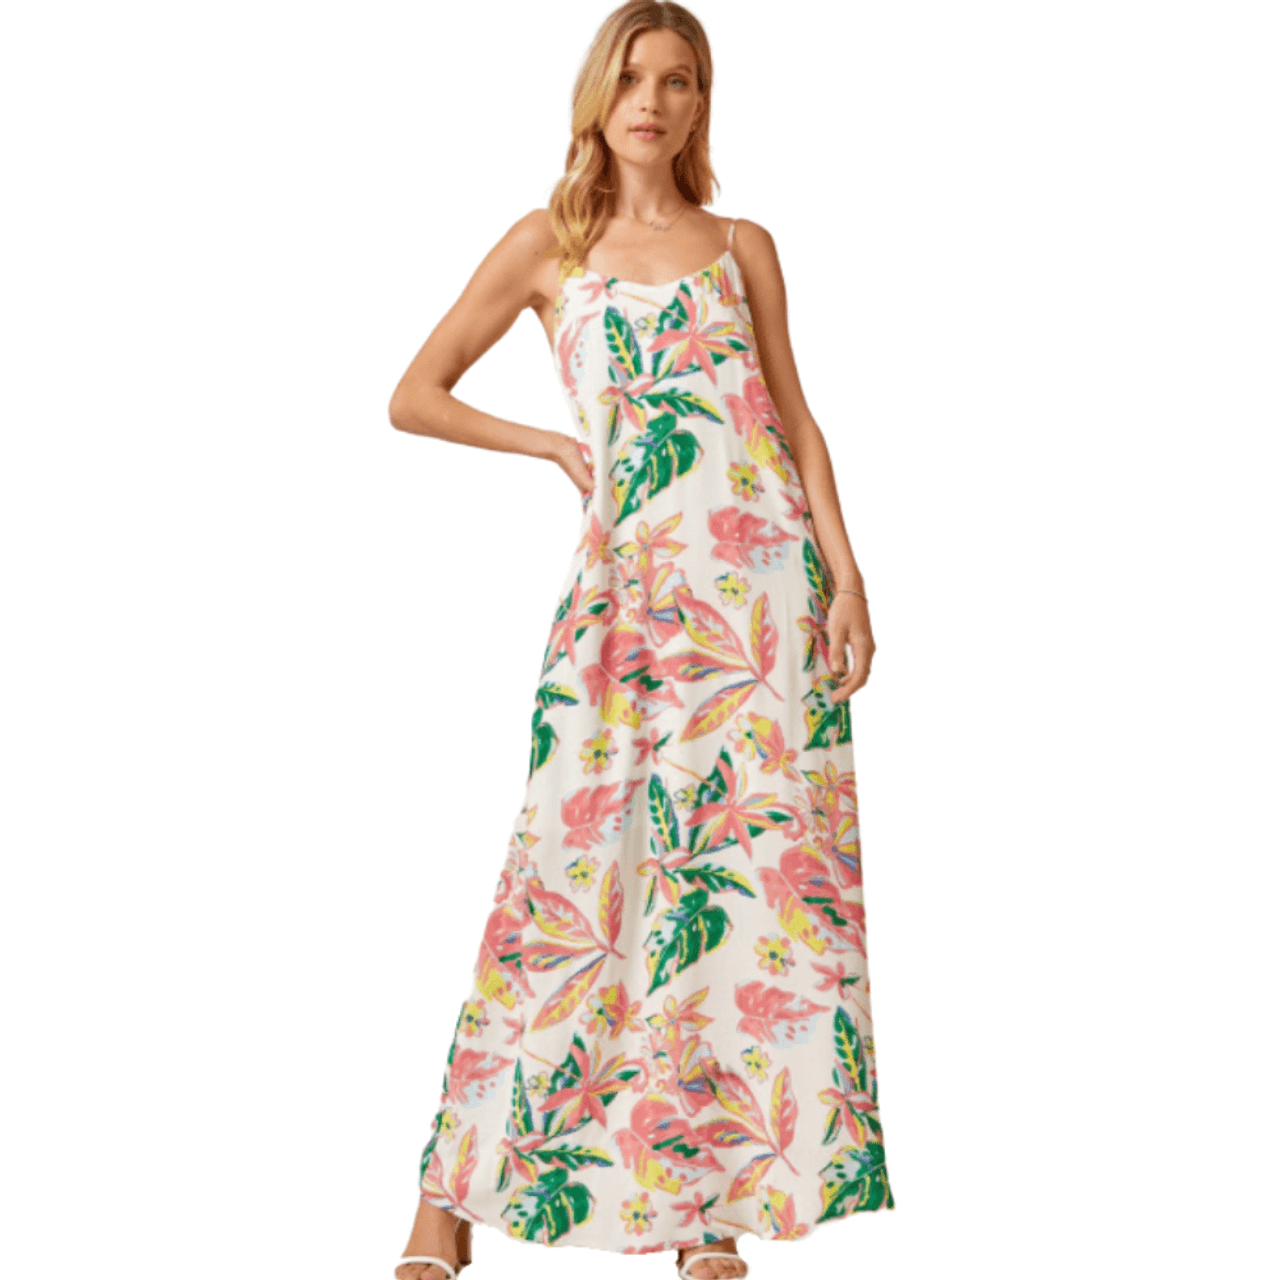 Andre by Unit Emily Wonder White Floral Maxi Dress